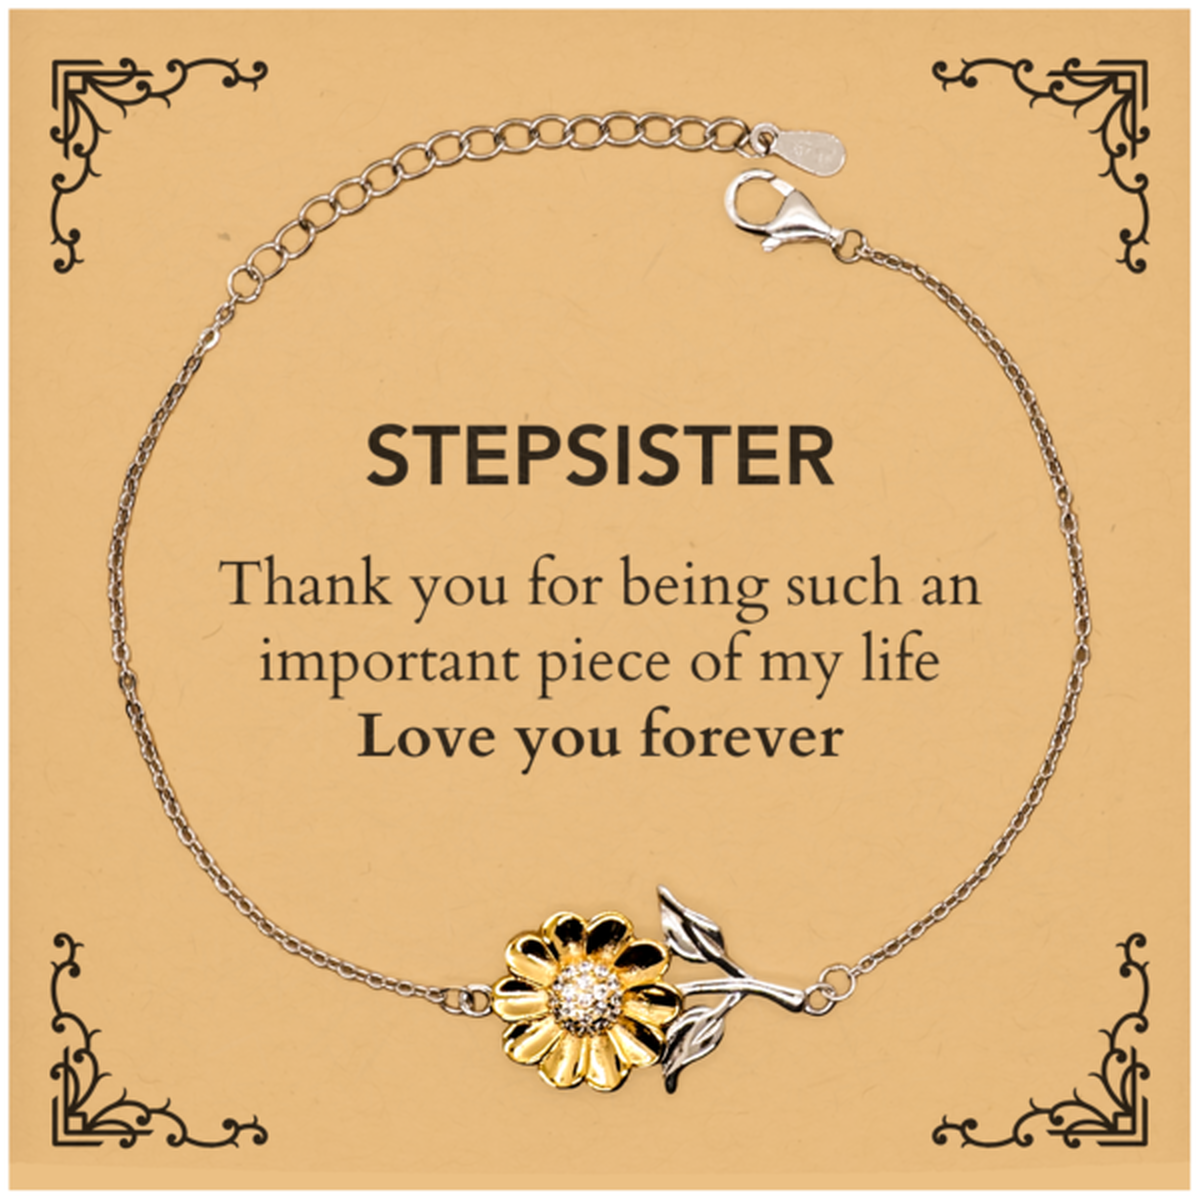 Appropriate Stepsister Sunflower Bracelet Epic Birthday Gifts for Stepsister Thank you for being such an important piece of my life Stepsister Christmas Mothers Fathers Day